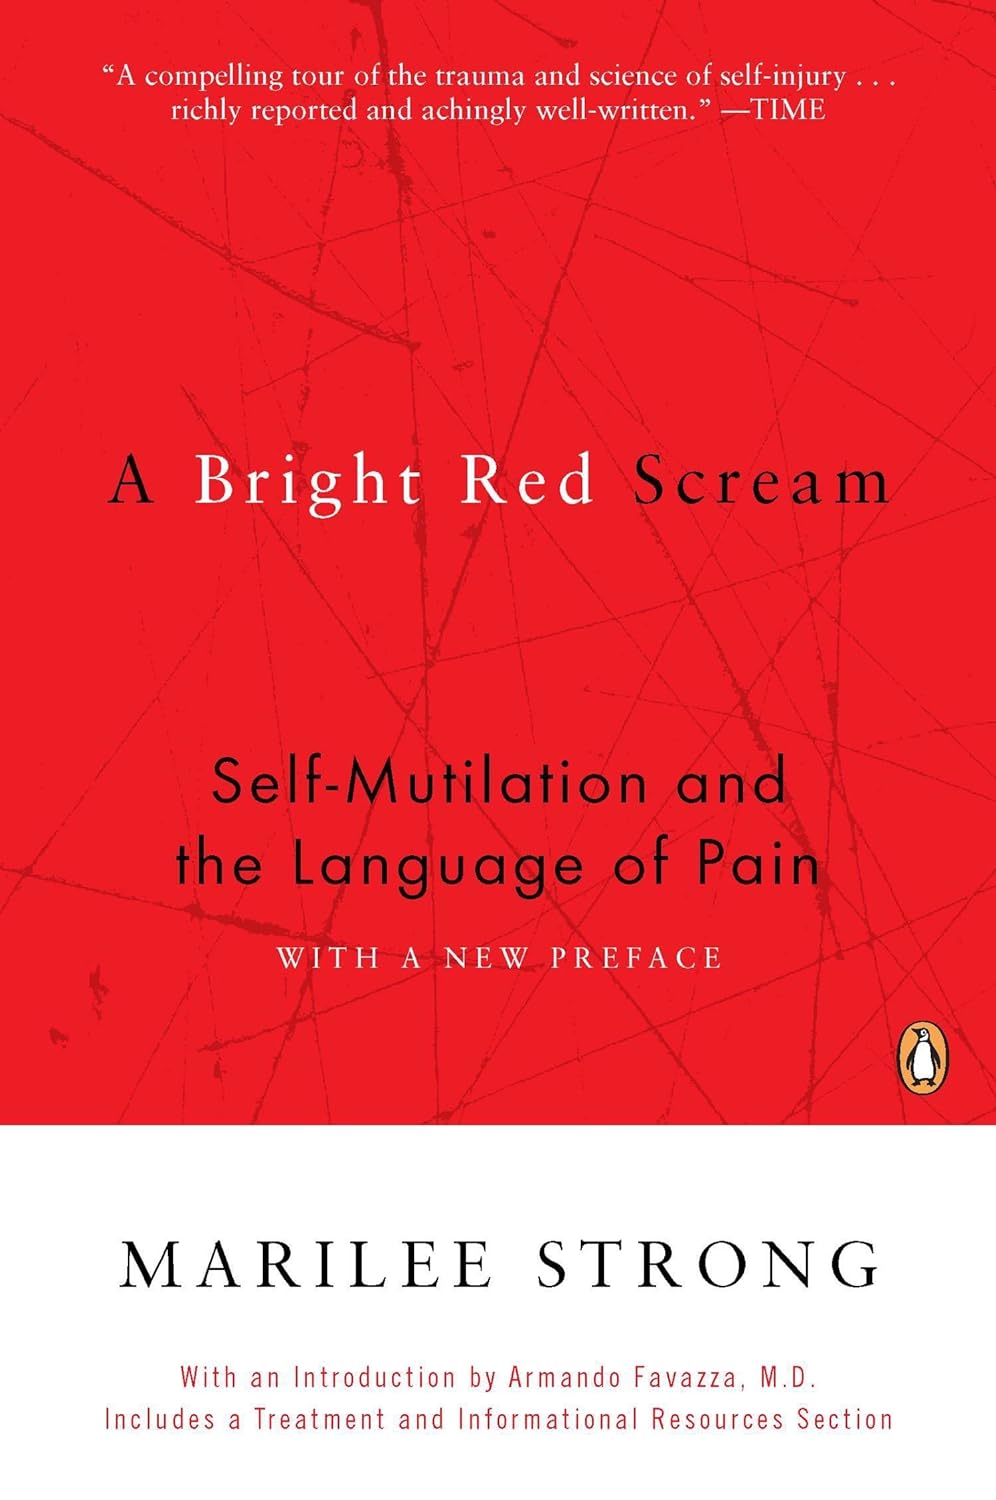 books about self harm2